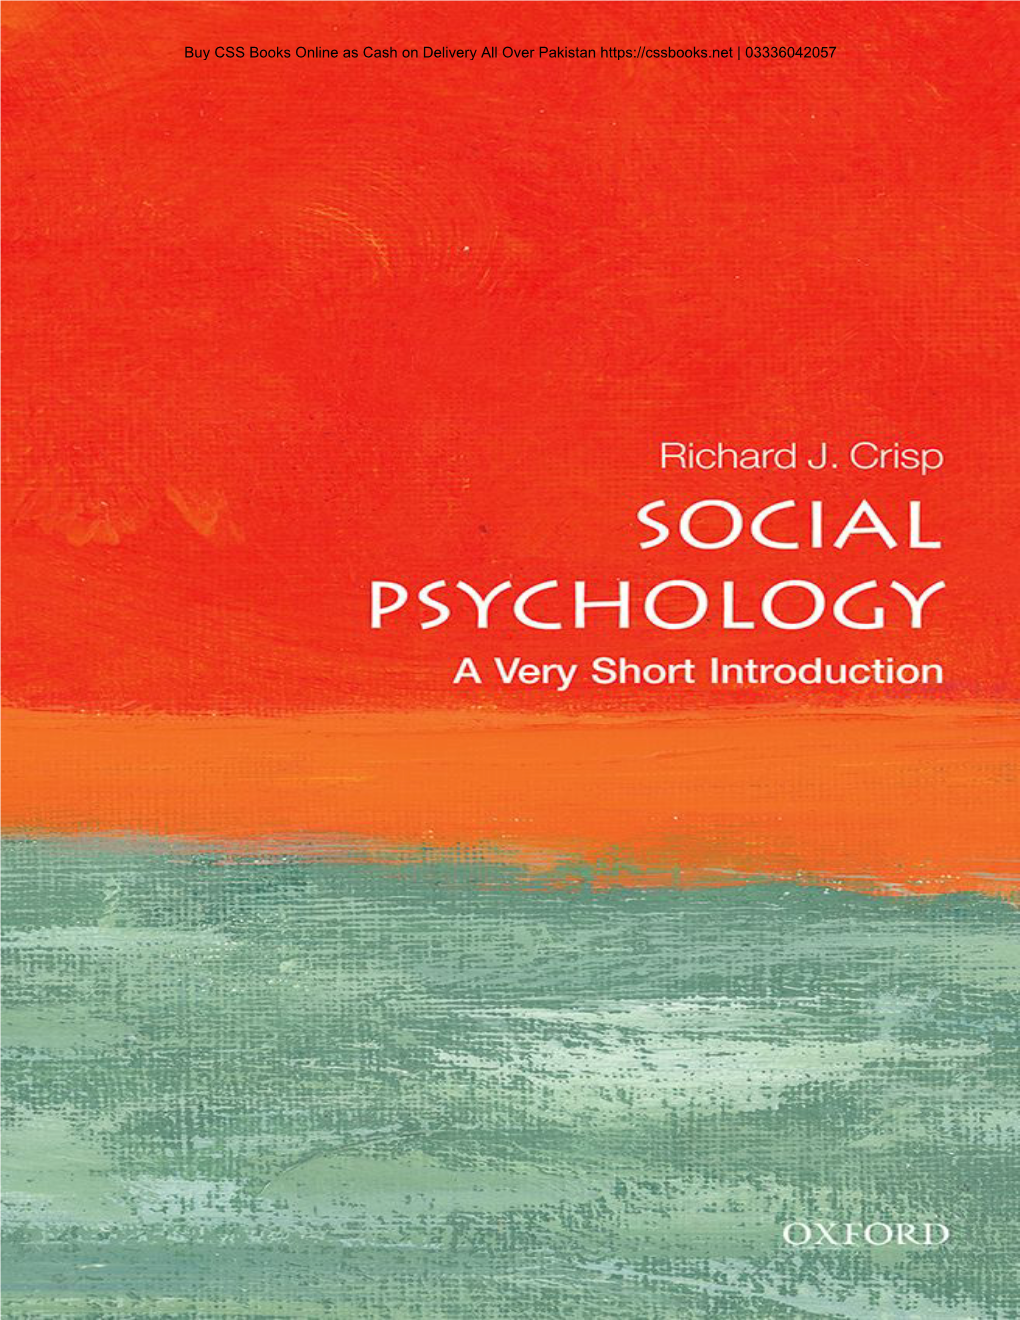 Social Psychology: a Very Short Introduction Buy CSS Books Online As Cash on Delivery All Over Pakistan | 03336042057